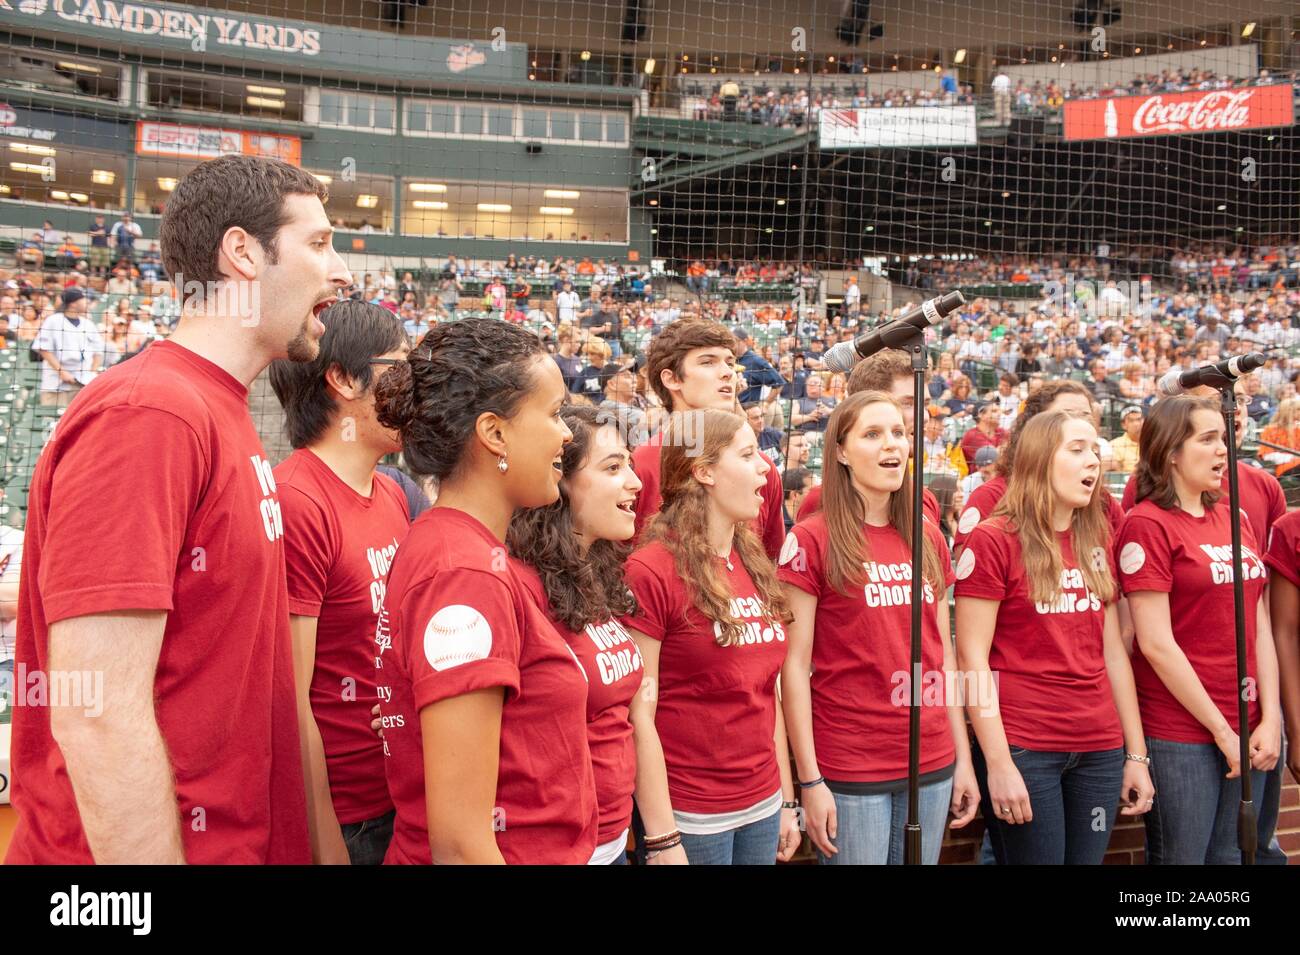 A musical group from the Johns Hopkins University in Baltimore, Maryland sings during a Baltimore Orioles Major League Baseball game, May 8, 2009. From the Homewood Photography collection. () Stock Photo